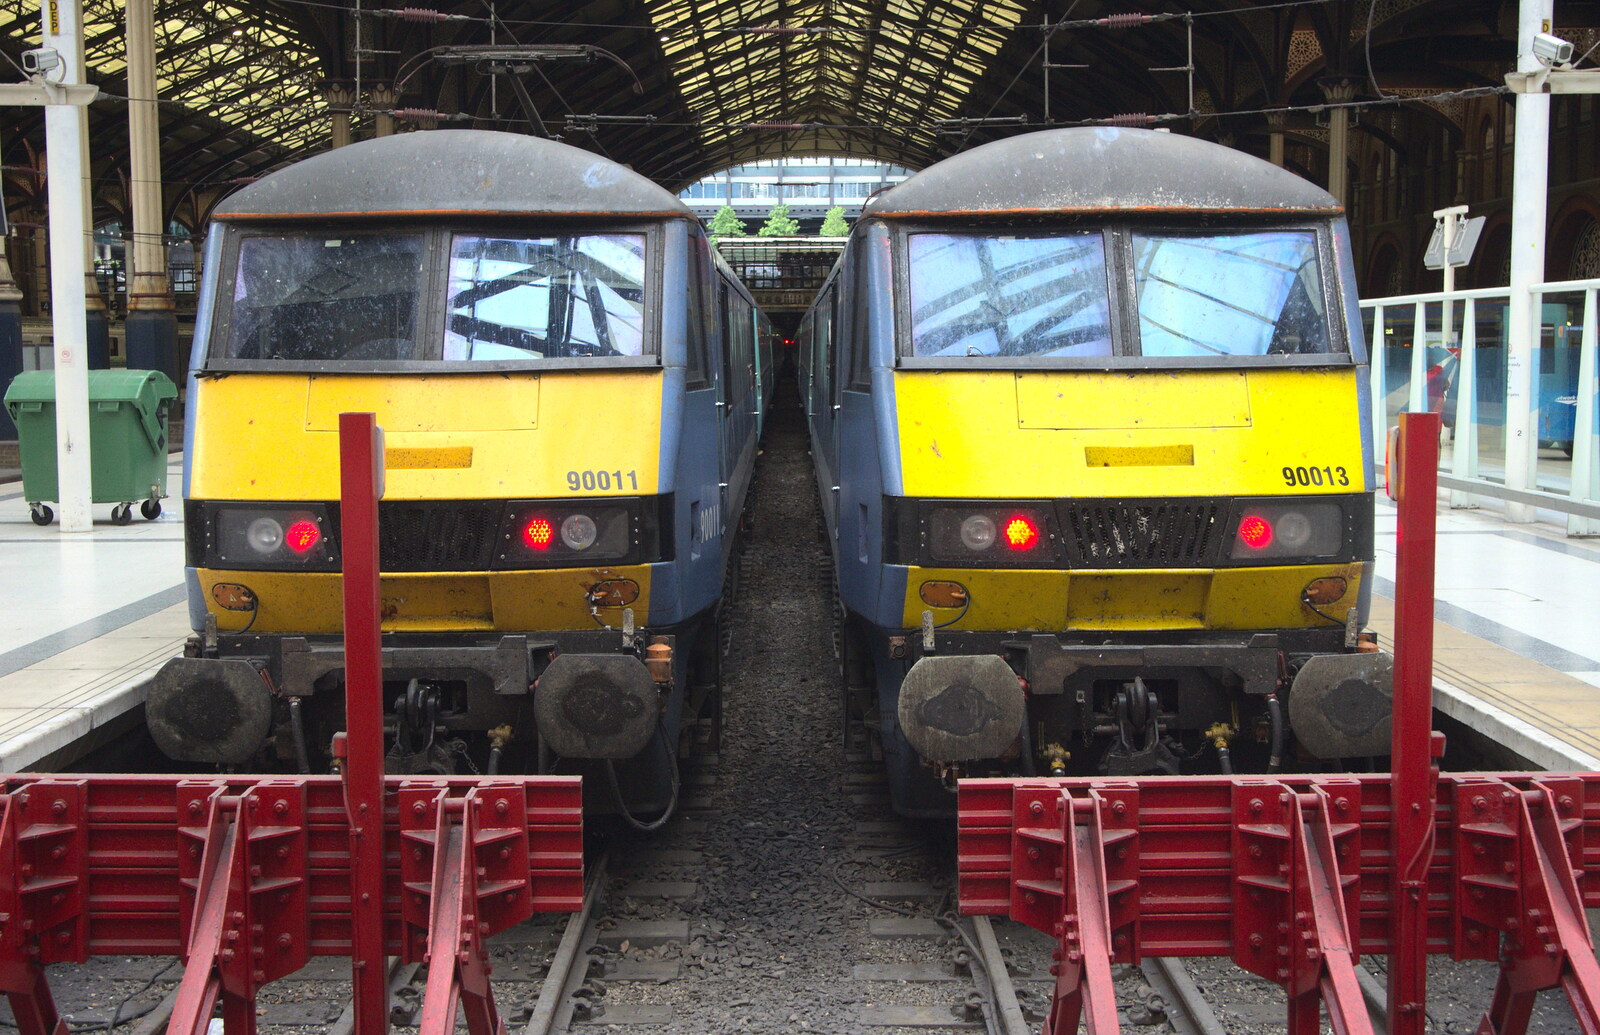 90011 and 90013 wait at Liverpool Street from Spitalfields and Brick Lane Street Art, Whitechapel, London - 10th August 2013